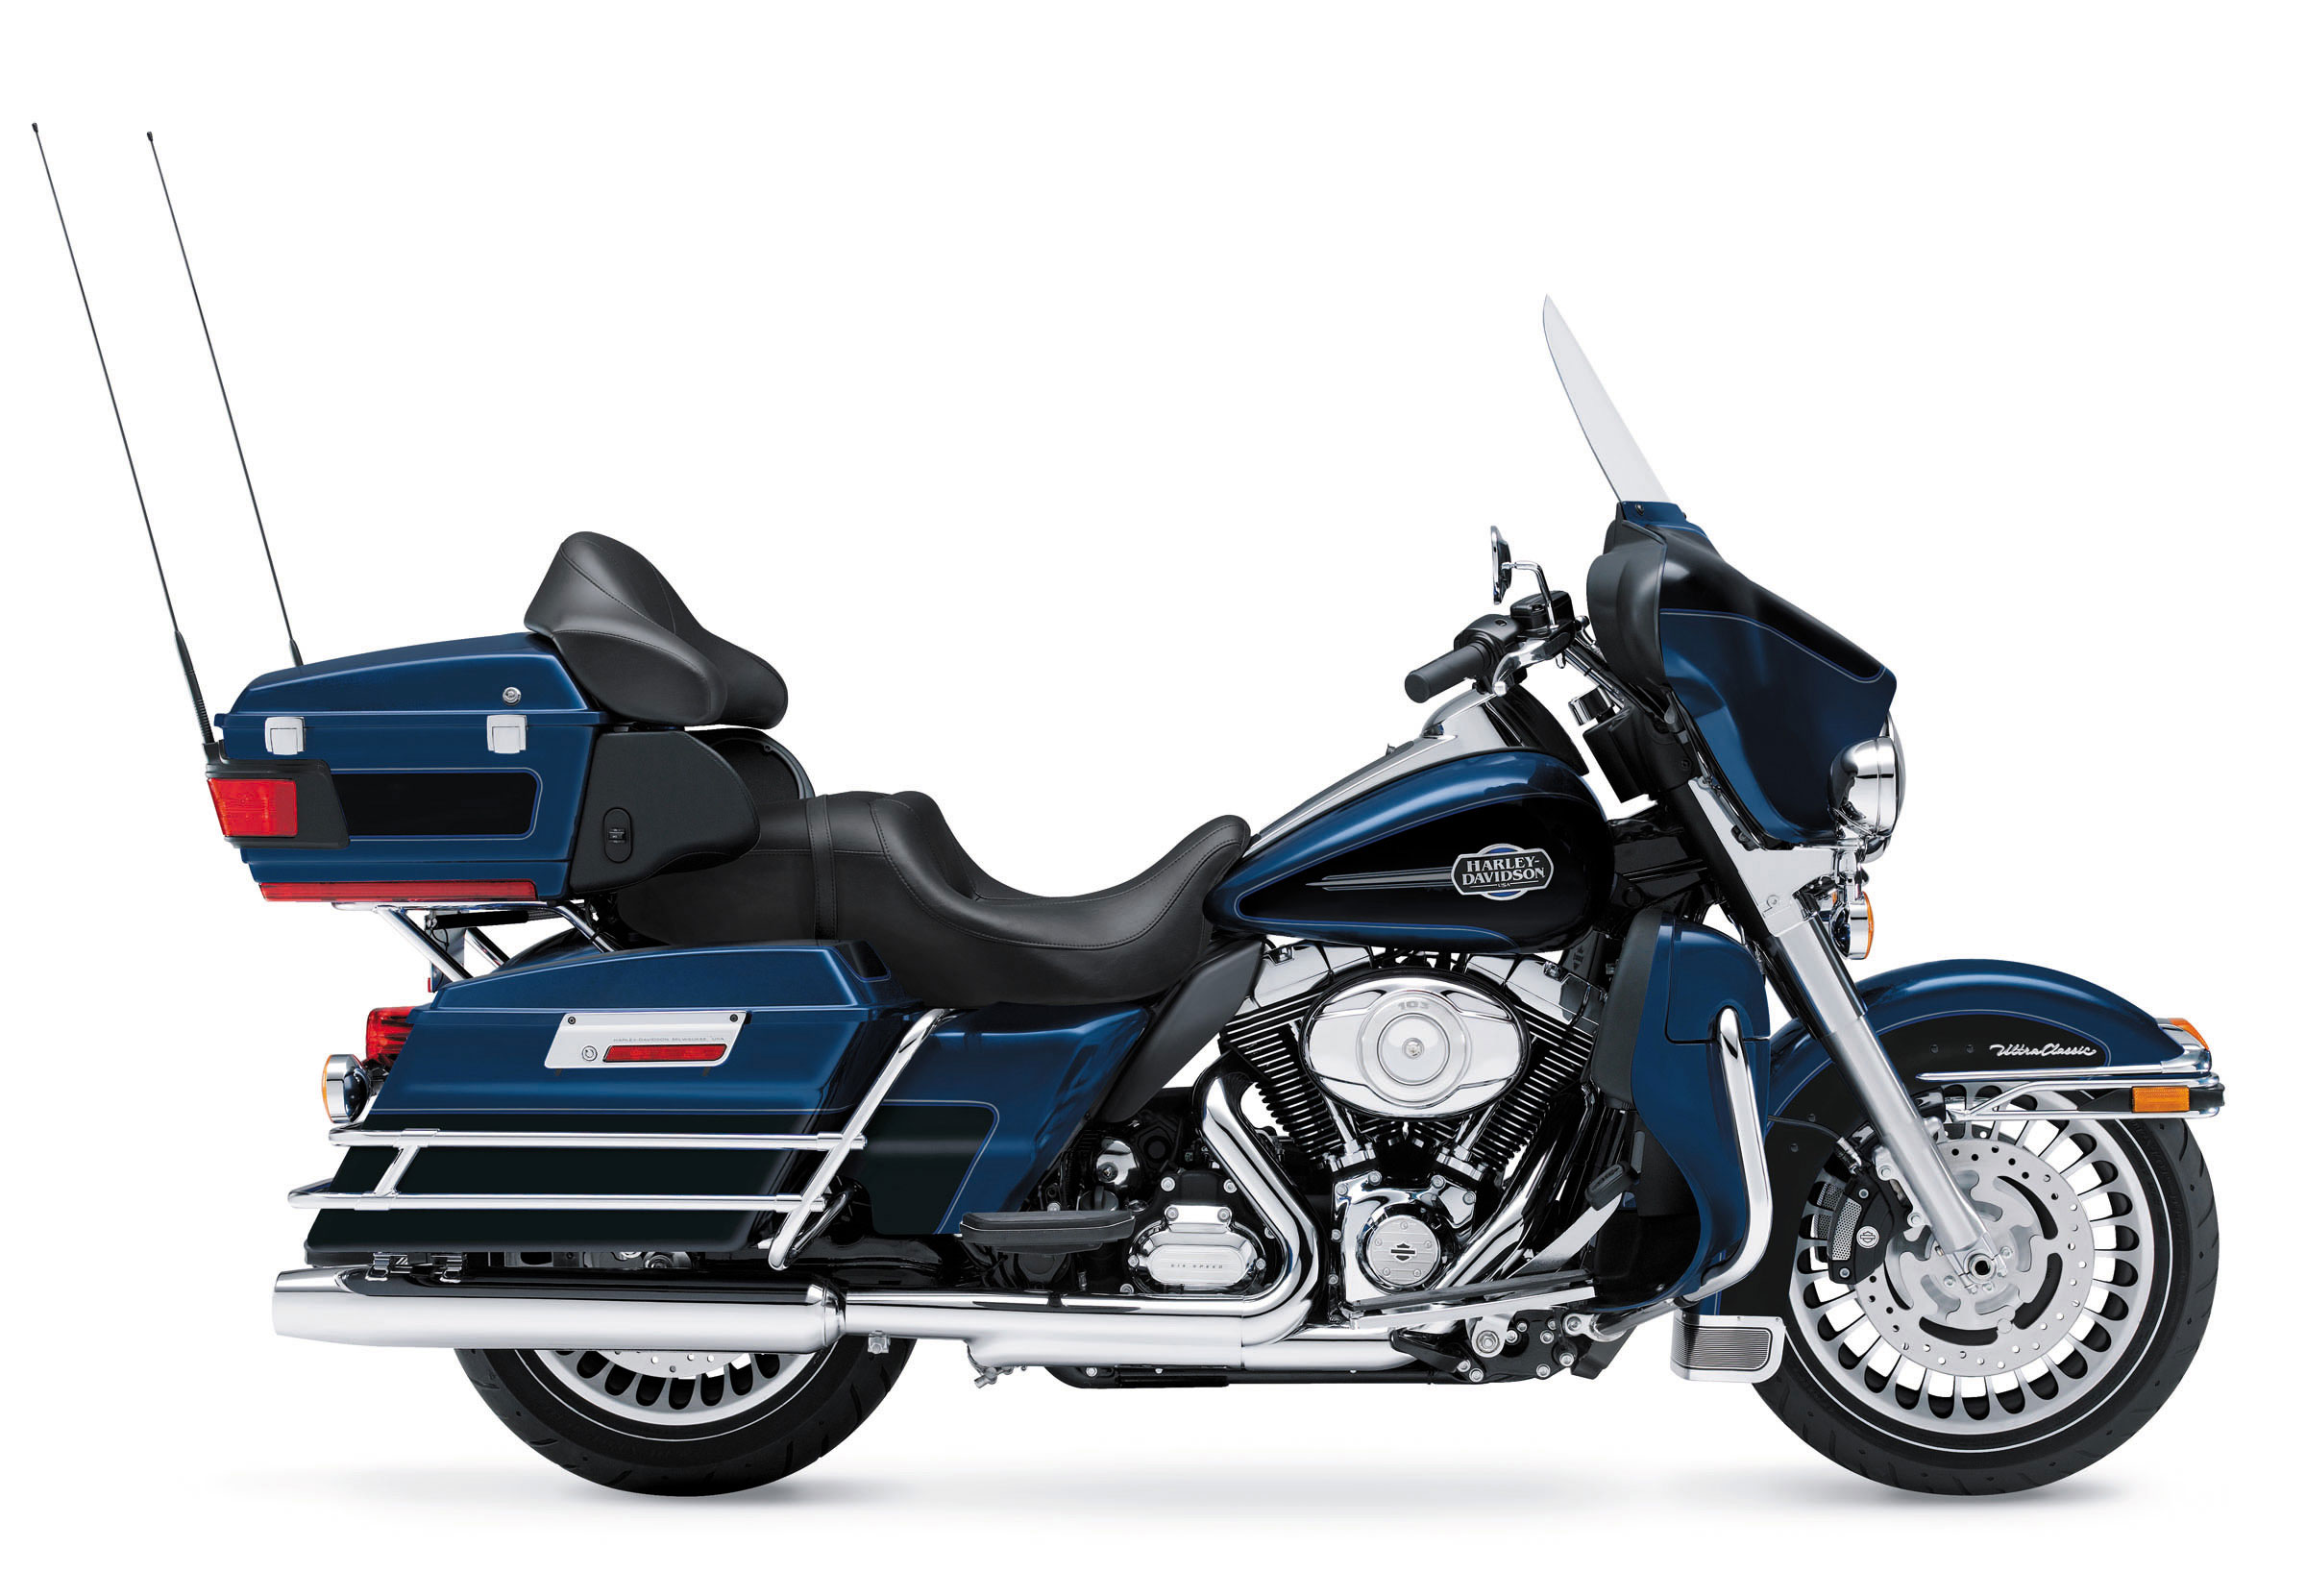 HQ Harley-Davidson Electra Glide Ultra Classic Wallpapers | File 366.16Kb